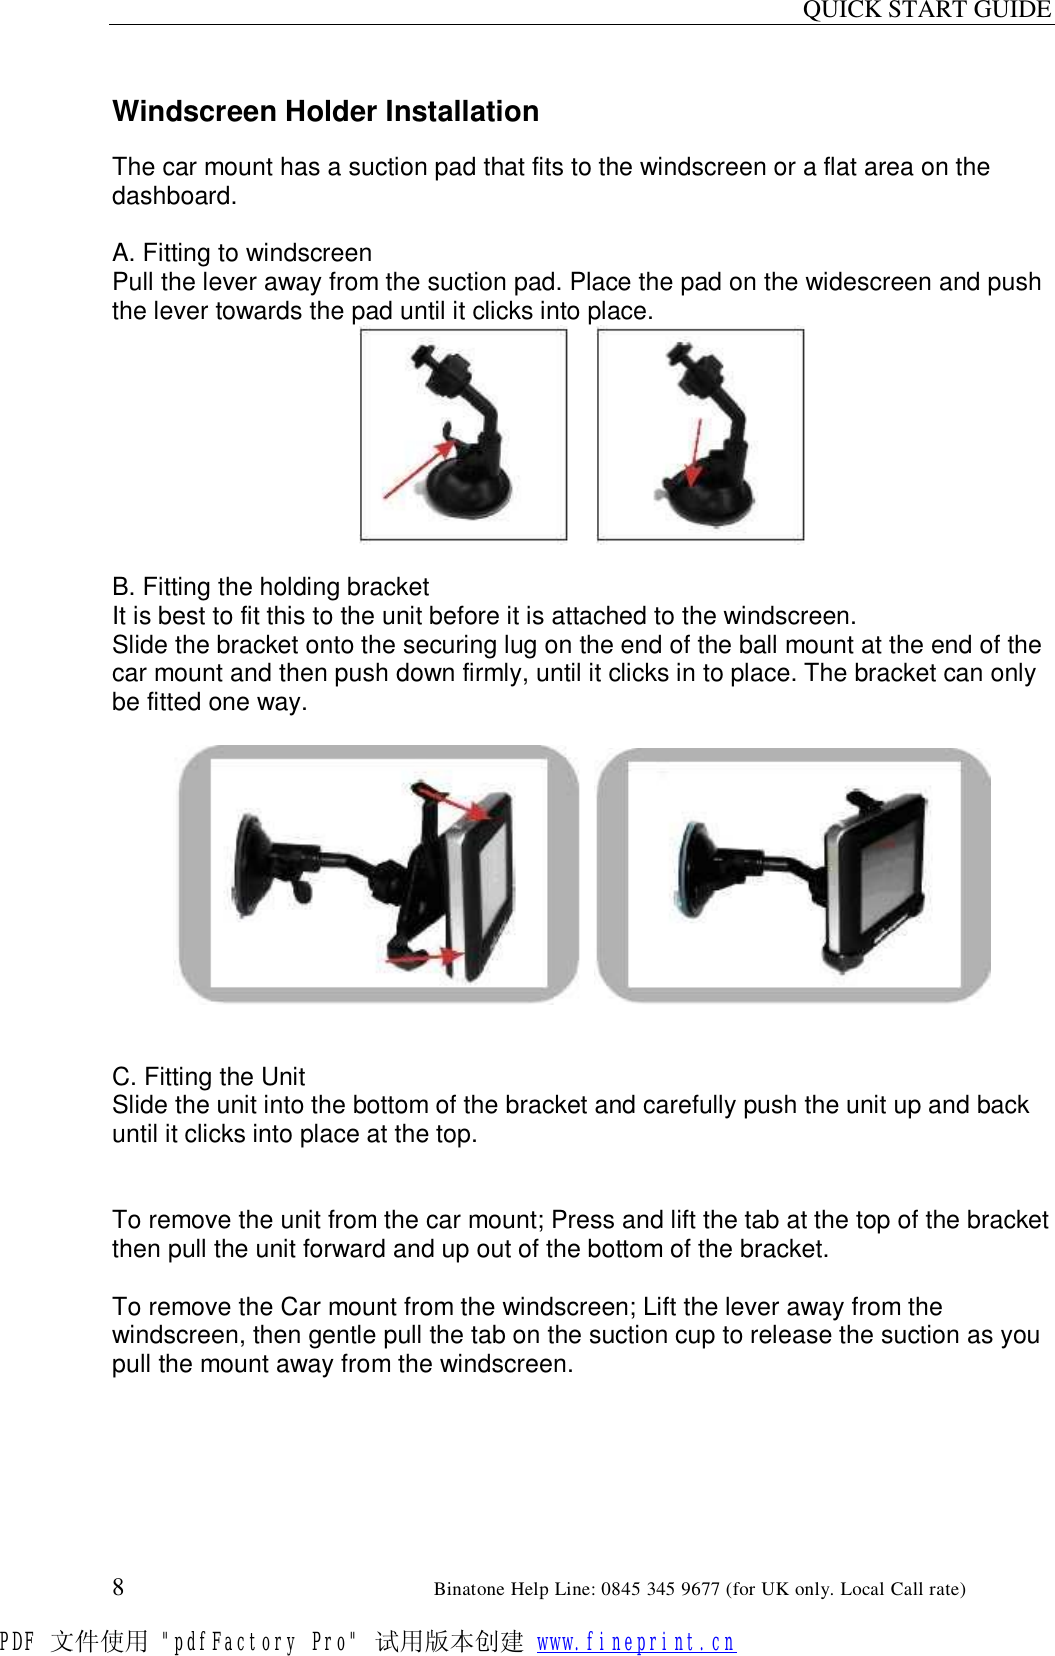 QUICK START GUIDE  8                                                        Binatone Help Line: 0845 345 9677 (for UK only. Local Call rate)  Windscreen Holder Installation  The car mount has a suction pad that fits to the windscreen or a flat area on the dashboard.  A. Fitting to windscreen Pull the lever away from the suction pad. Place the pad on the widescreen and push the lever towards the pad until it clicks into place.        B. Fitting the holding bracket It is best to fit this to the unit before it is attached to the windscreen. Slide the bracket onto the securing lug on the end of the ball mount at the end of the car mount and then push down firmly, until it clicks in to place. The bracket can only be fitted one way.        C. Fitting the Unit Slide the unit into the bottom of the bracket and carefully push the unit up and back until it clicks into place at the top.   To remove the unit from the car mount; Press and lift the tab at the top of the bracket then pull the unit forward and up out of the bottom of the bracket.  To remove the Car mount from the windscreen; Lift the lever away from the windscreen, then gentle pull the tab on the suction cup to release the suction as you pull the mount away from the windscreen. PDF 文件使用 &quot;pdfFactory Pro&quot; 试用版本创建 www.fineprint.cn